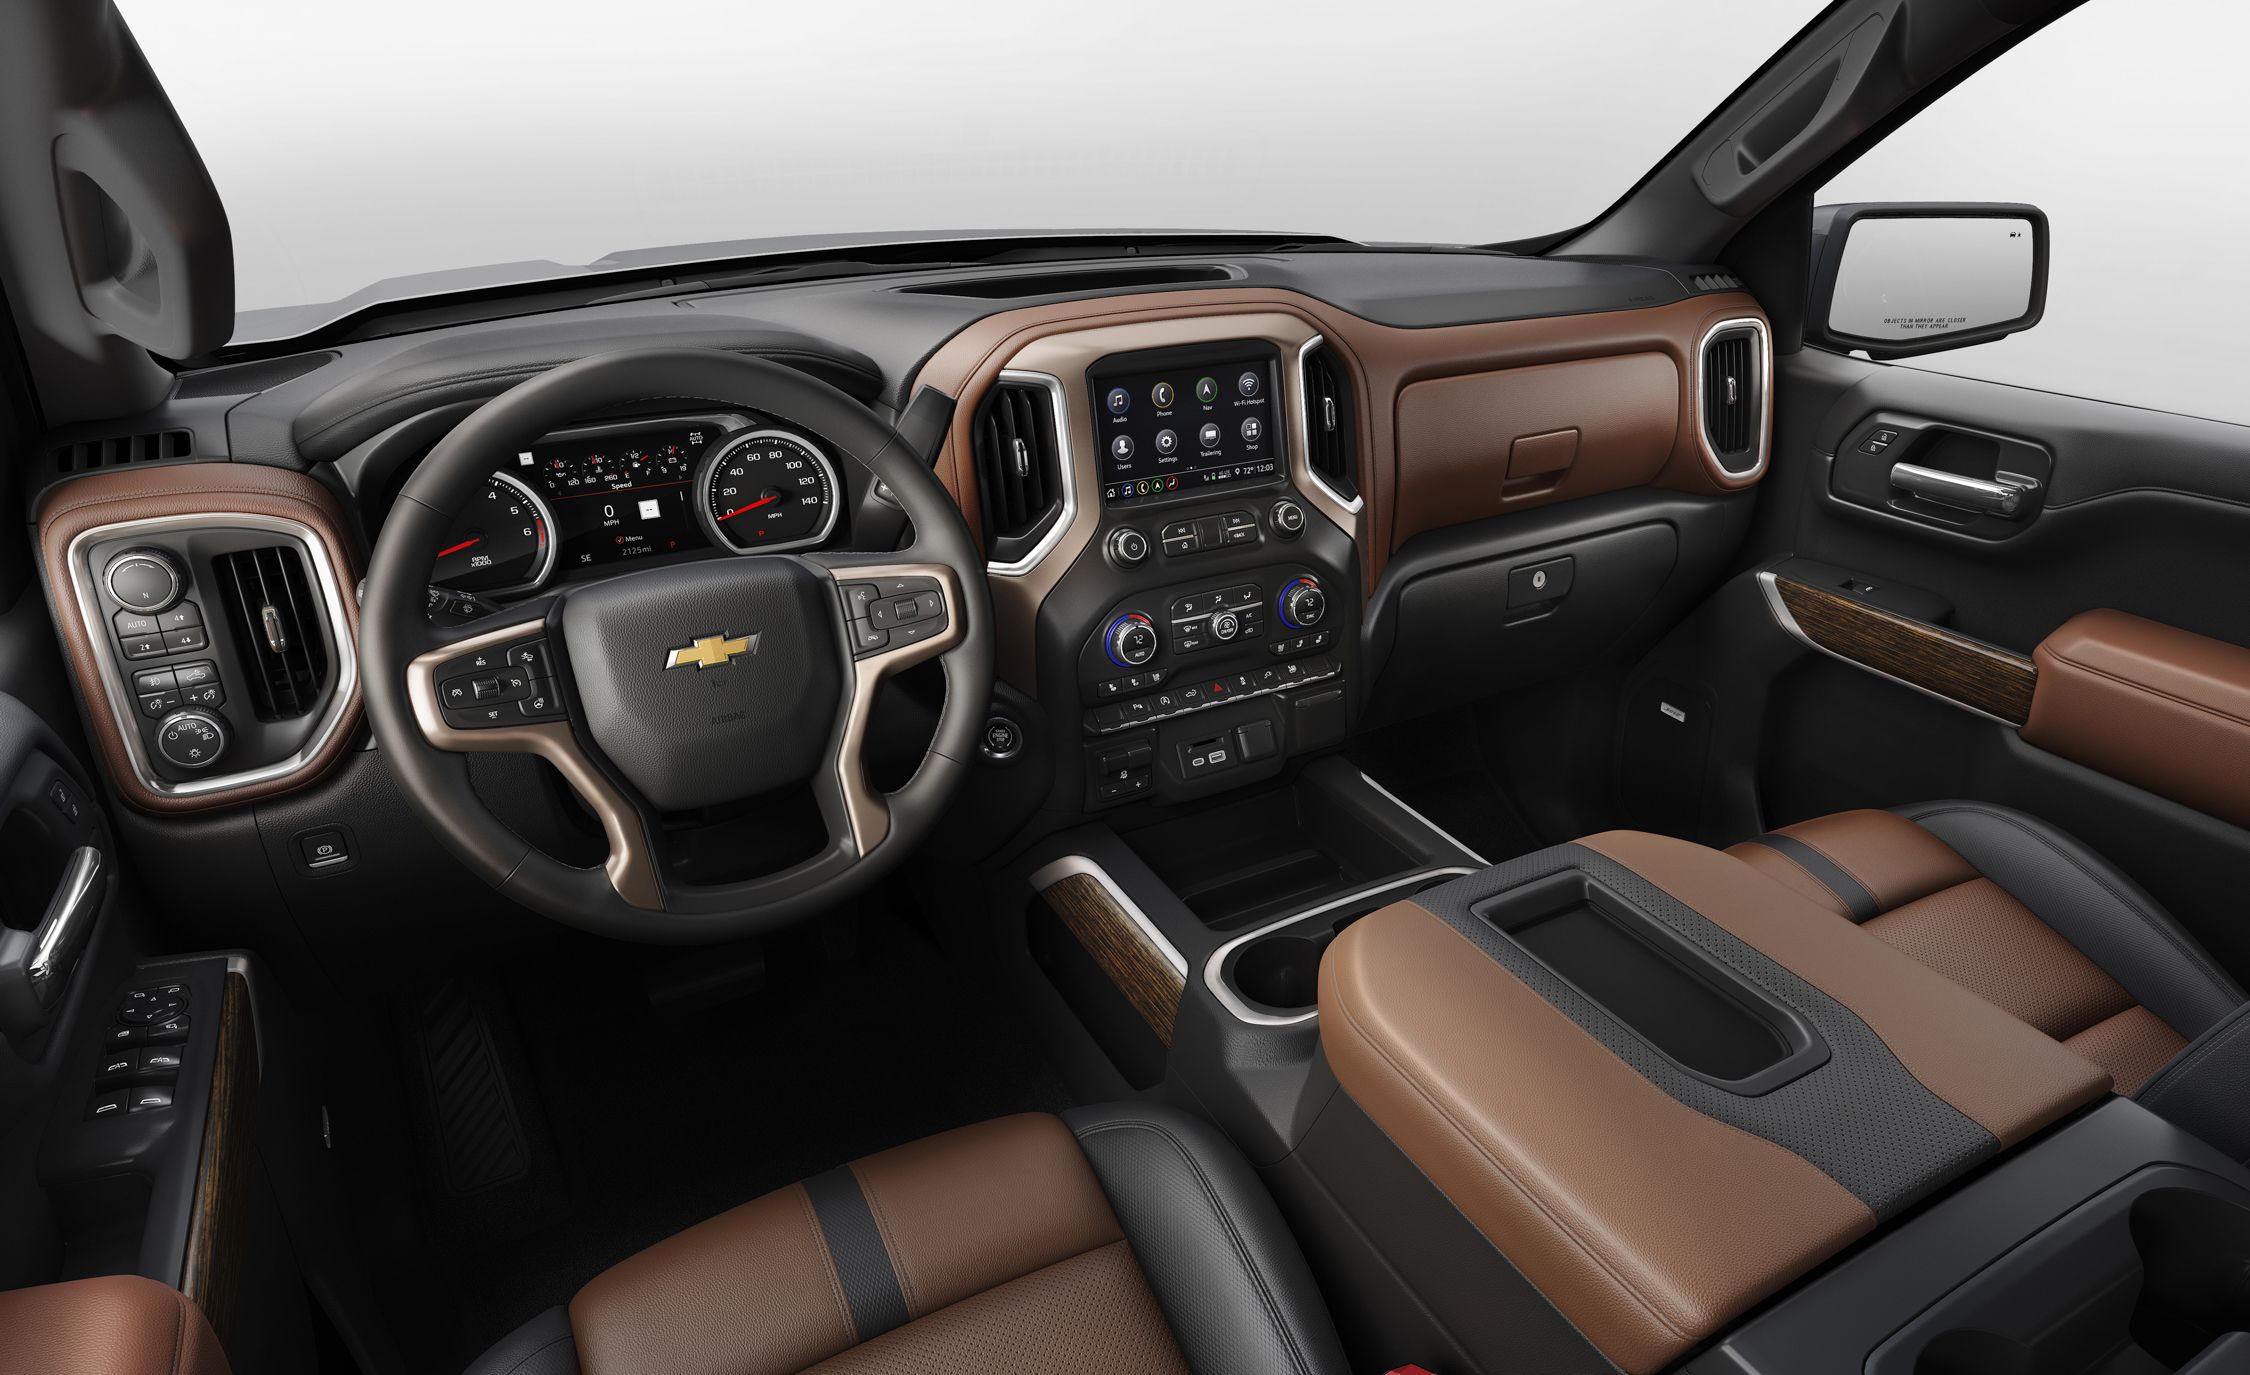 The 15 Things You Need To Know About The 2019 Chevrolet